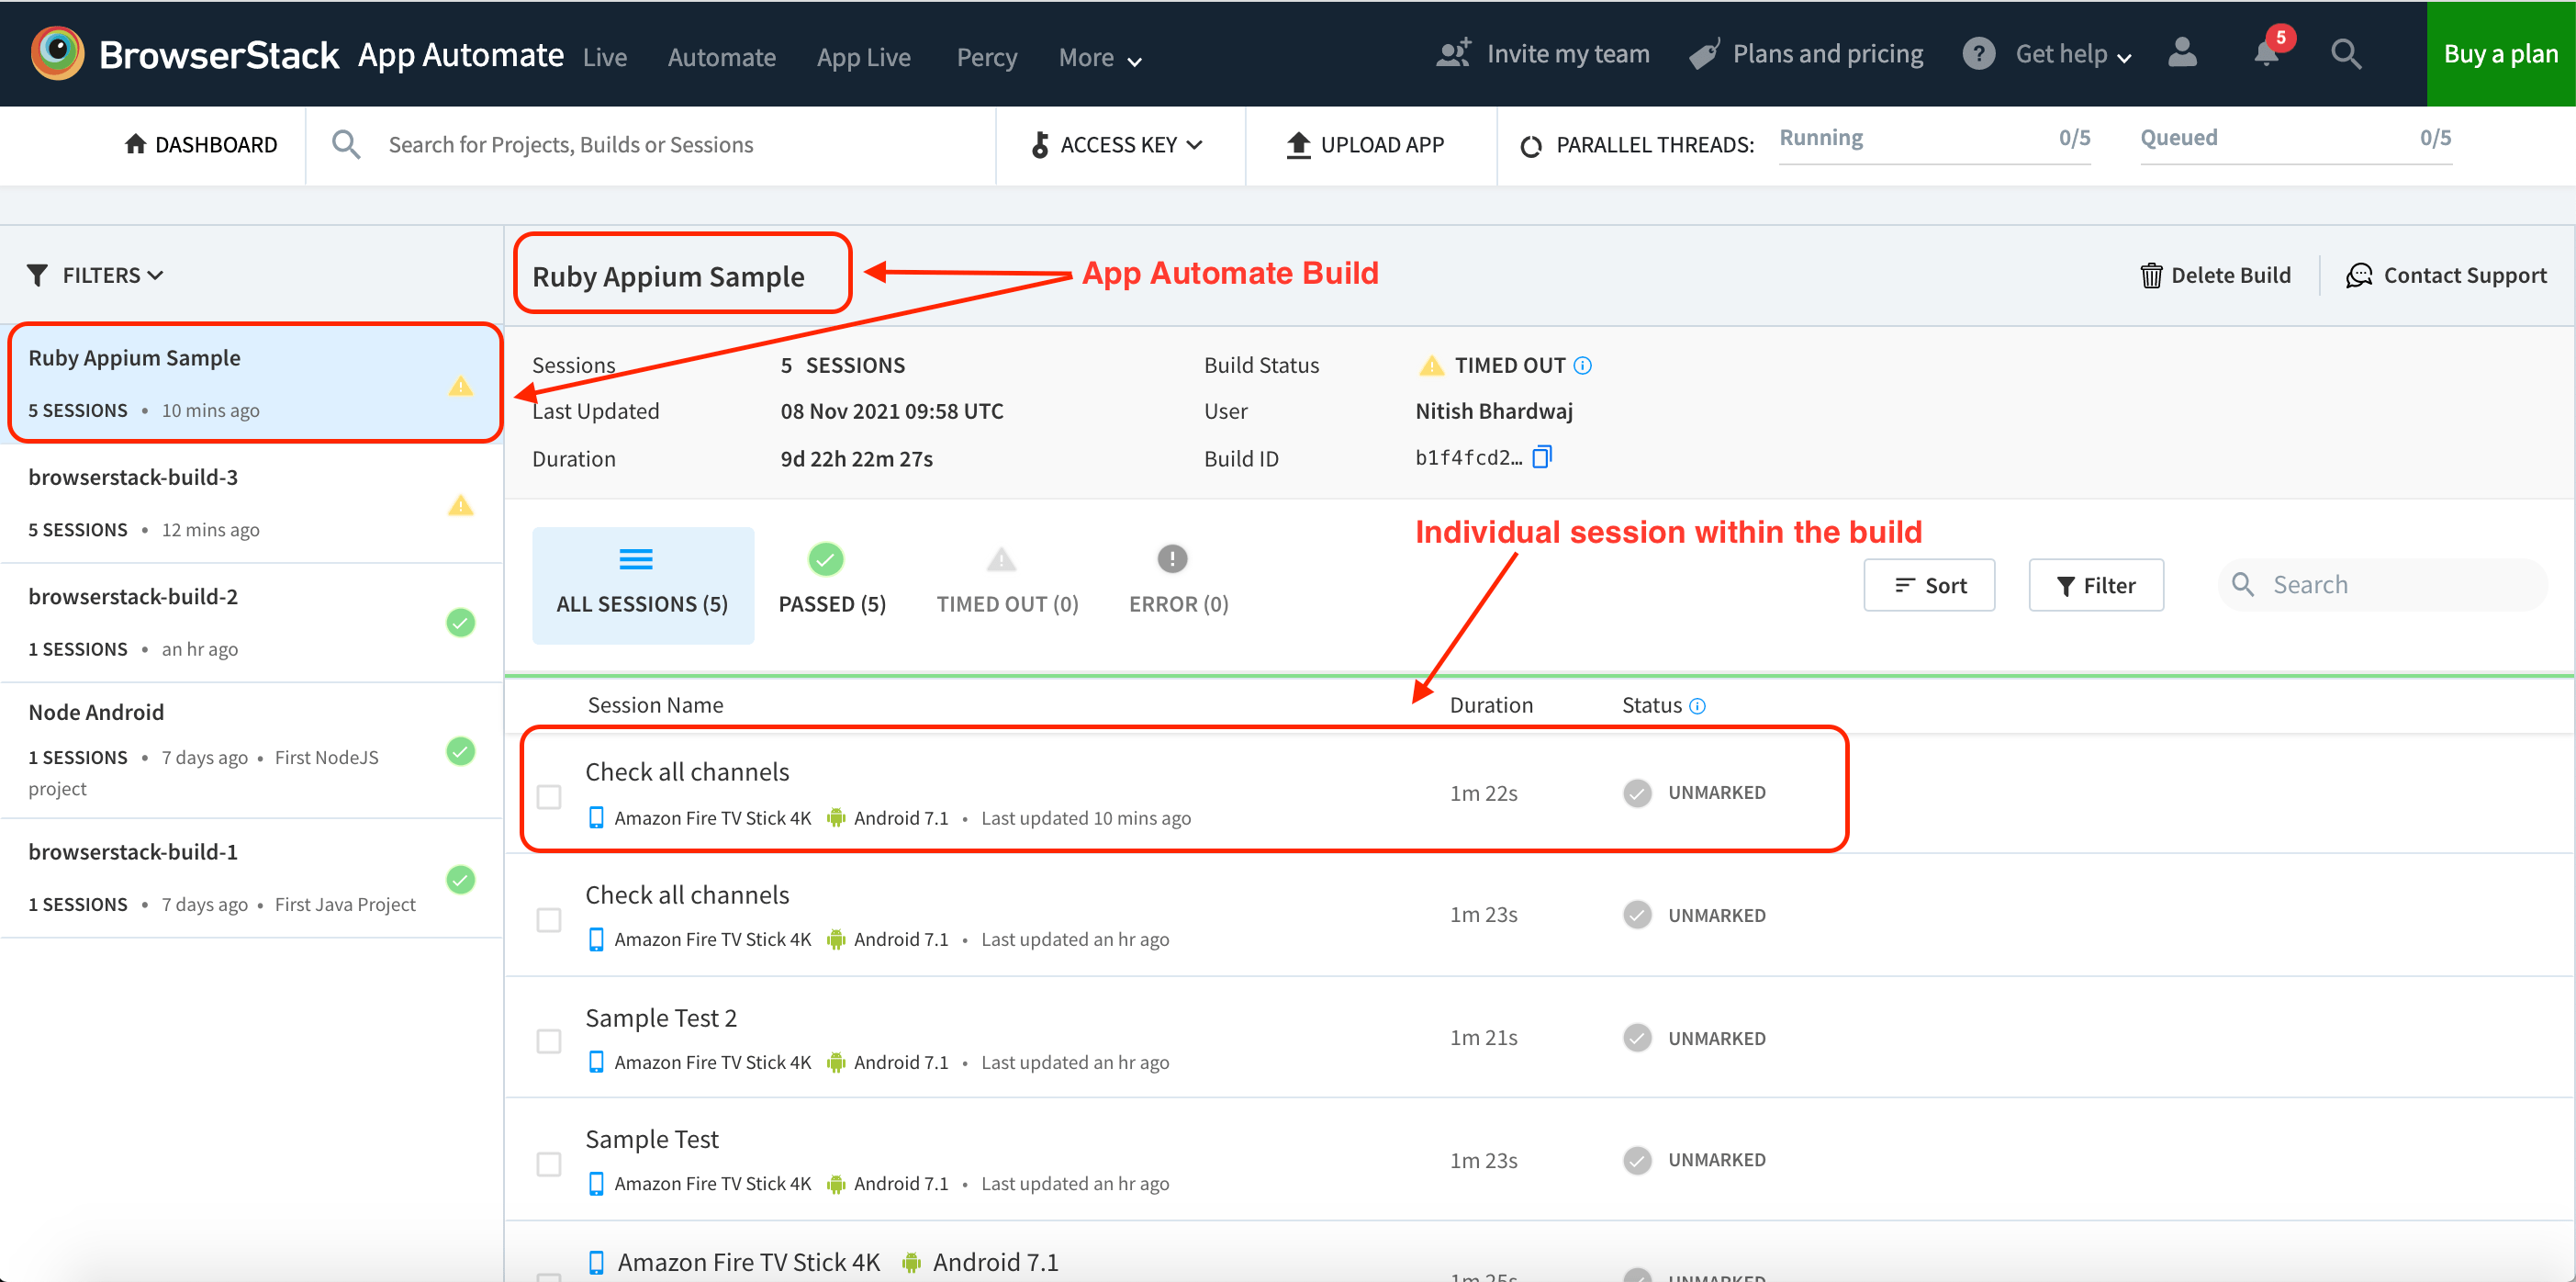 App Automate build listing on browserstack dashboard